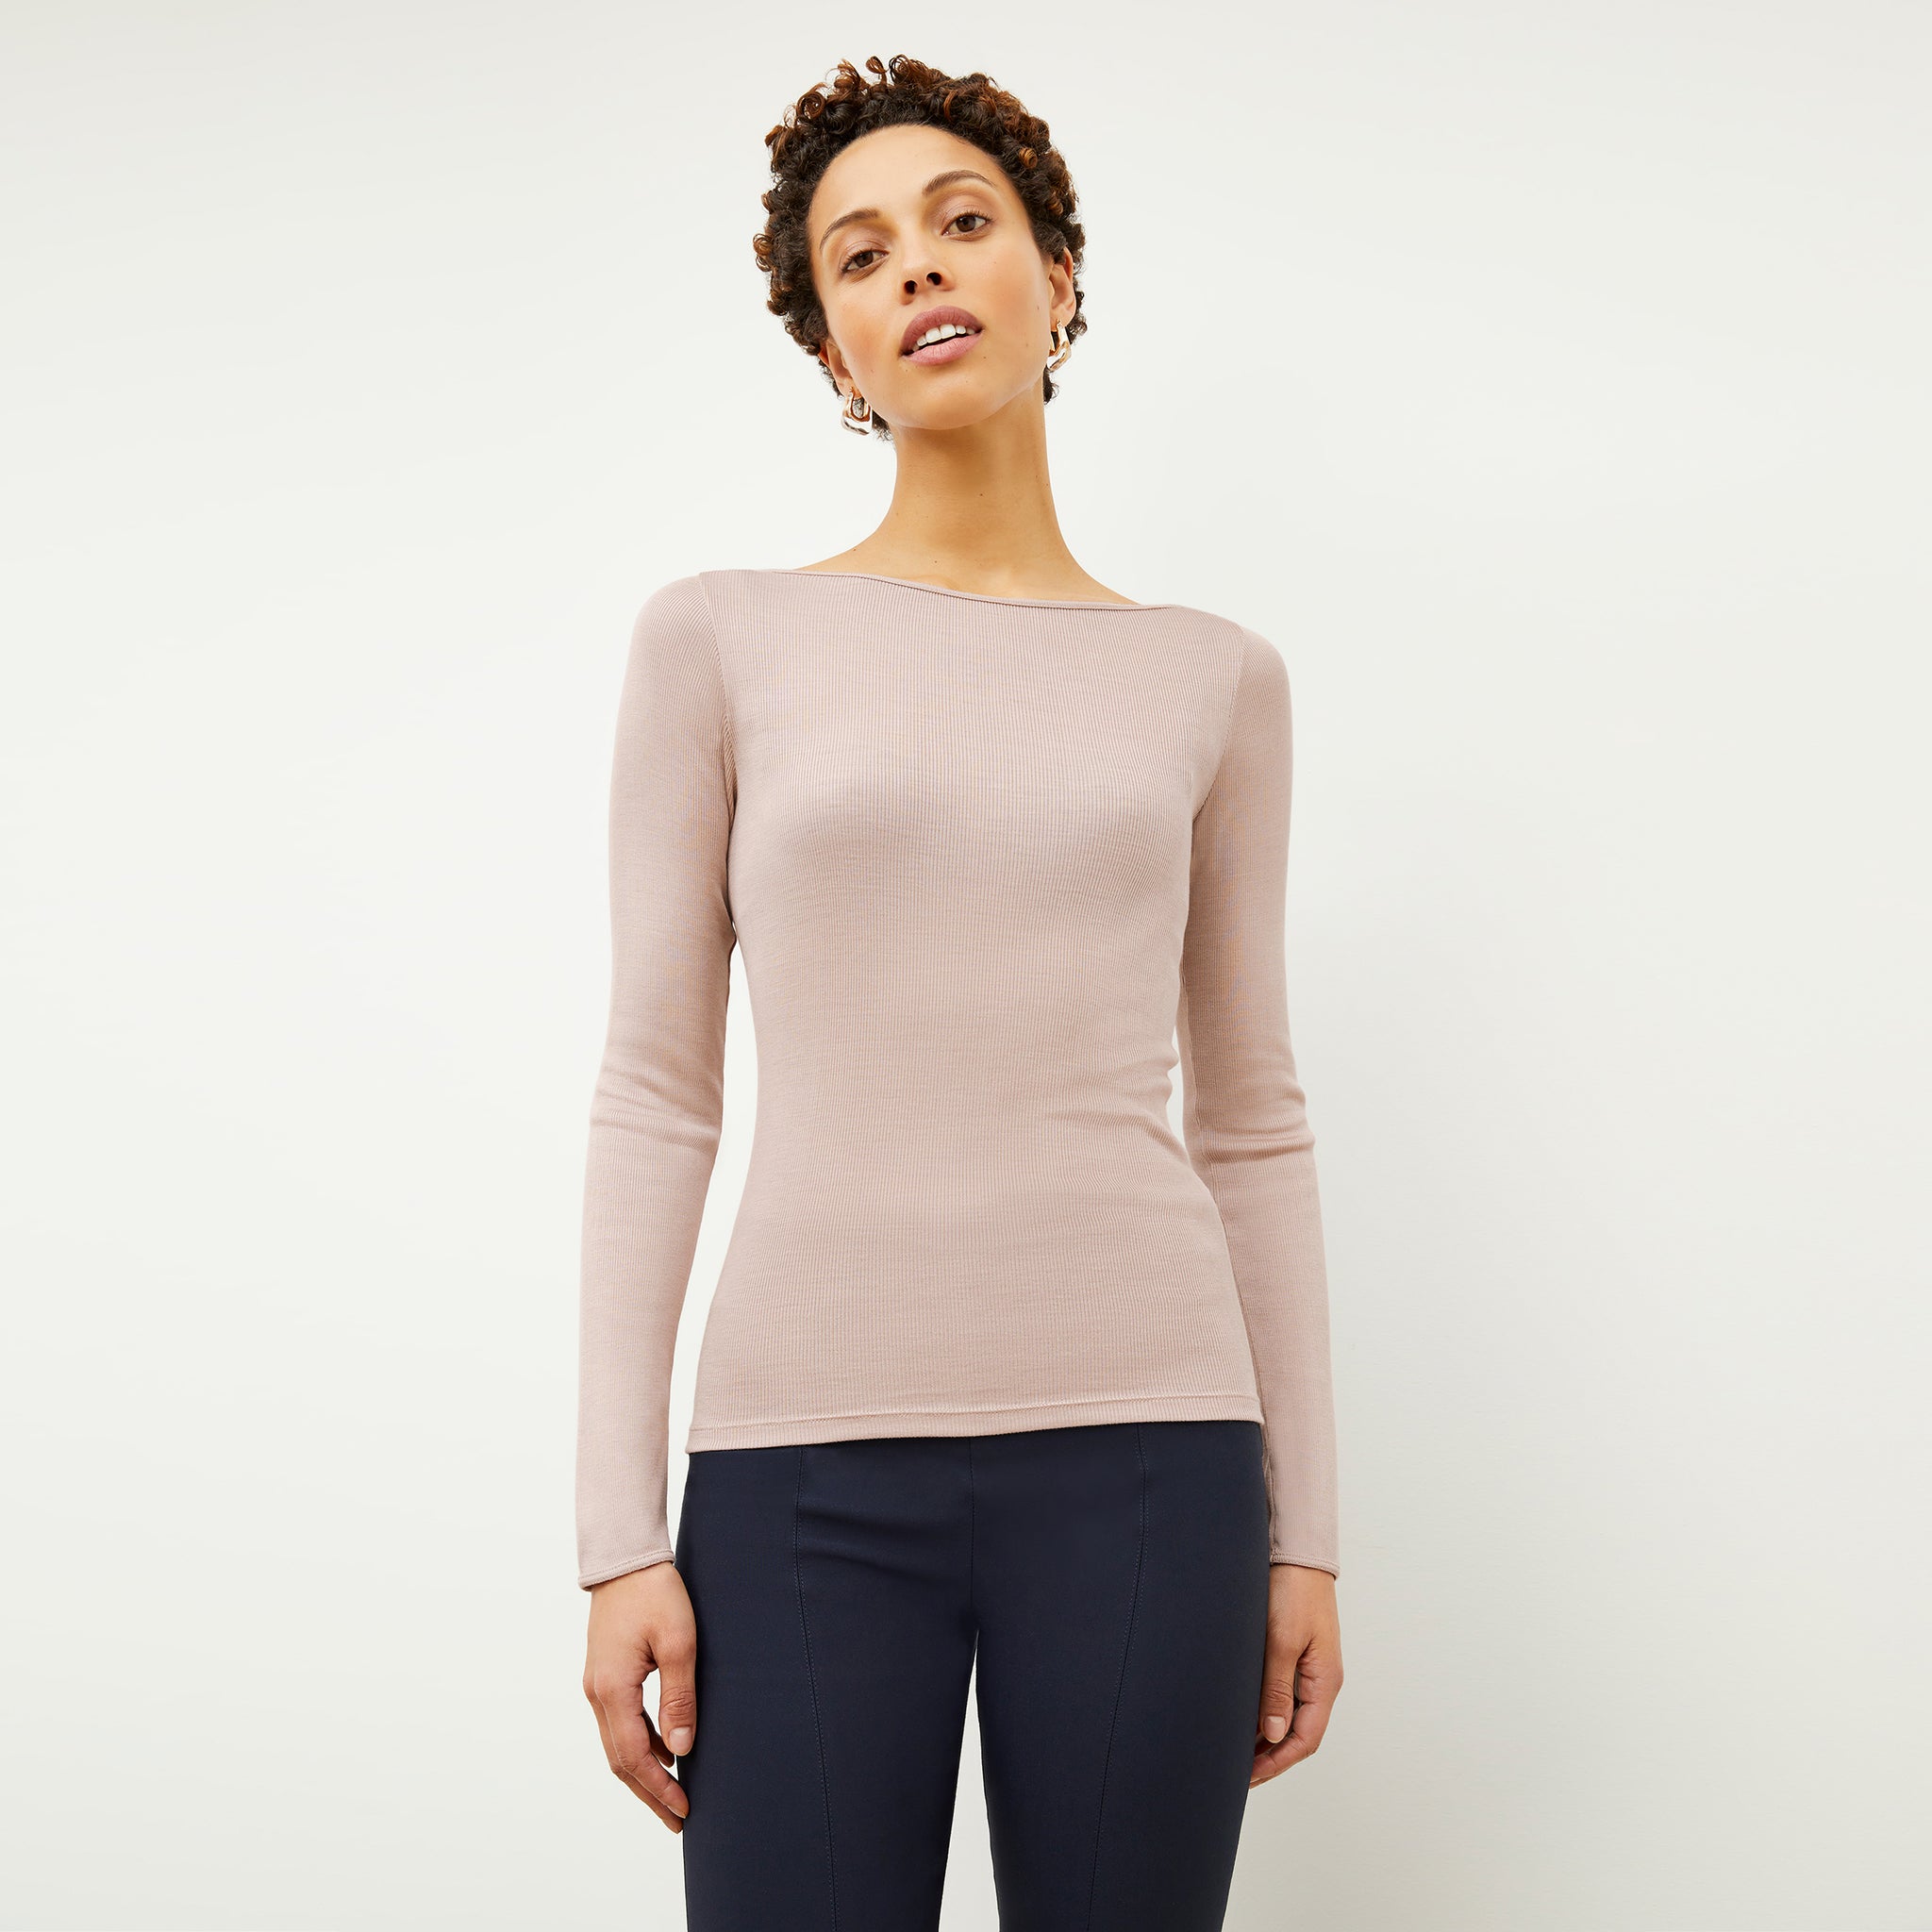 Front image of a woman wearing the Meg Top in Blush